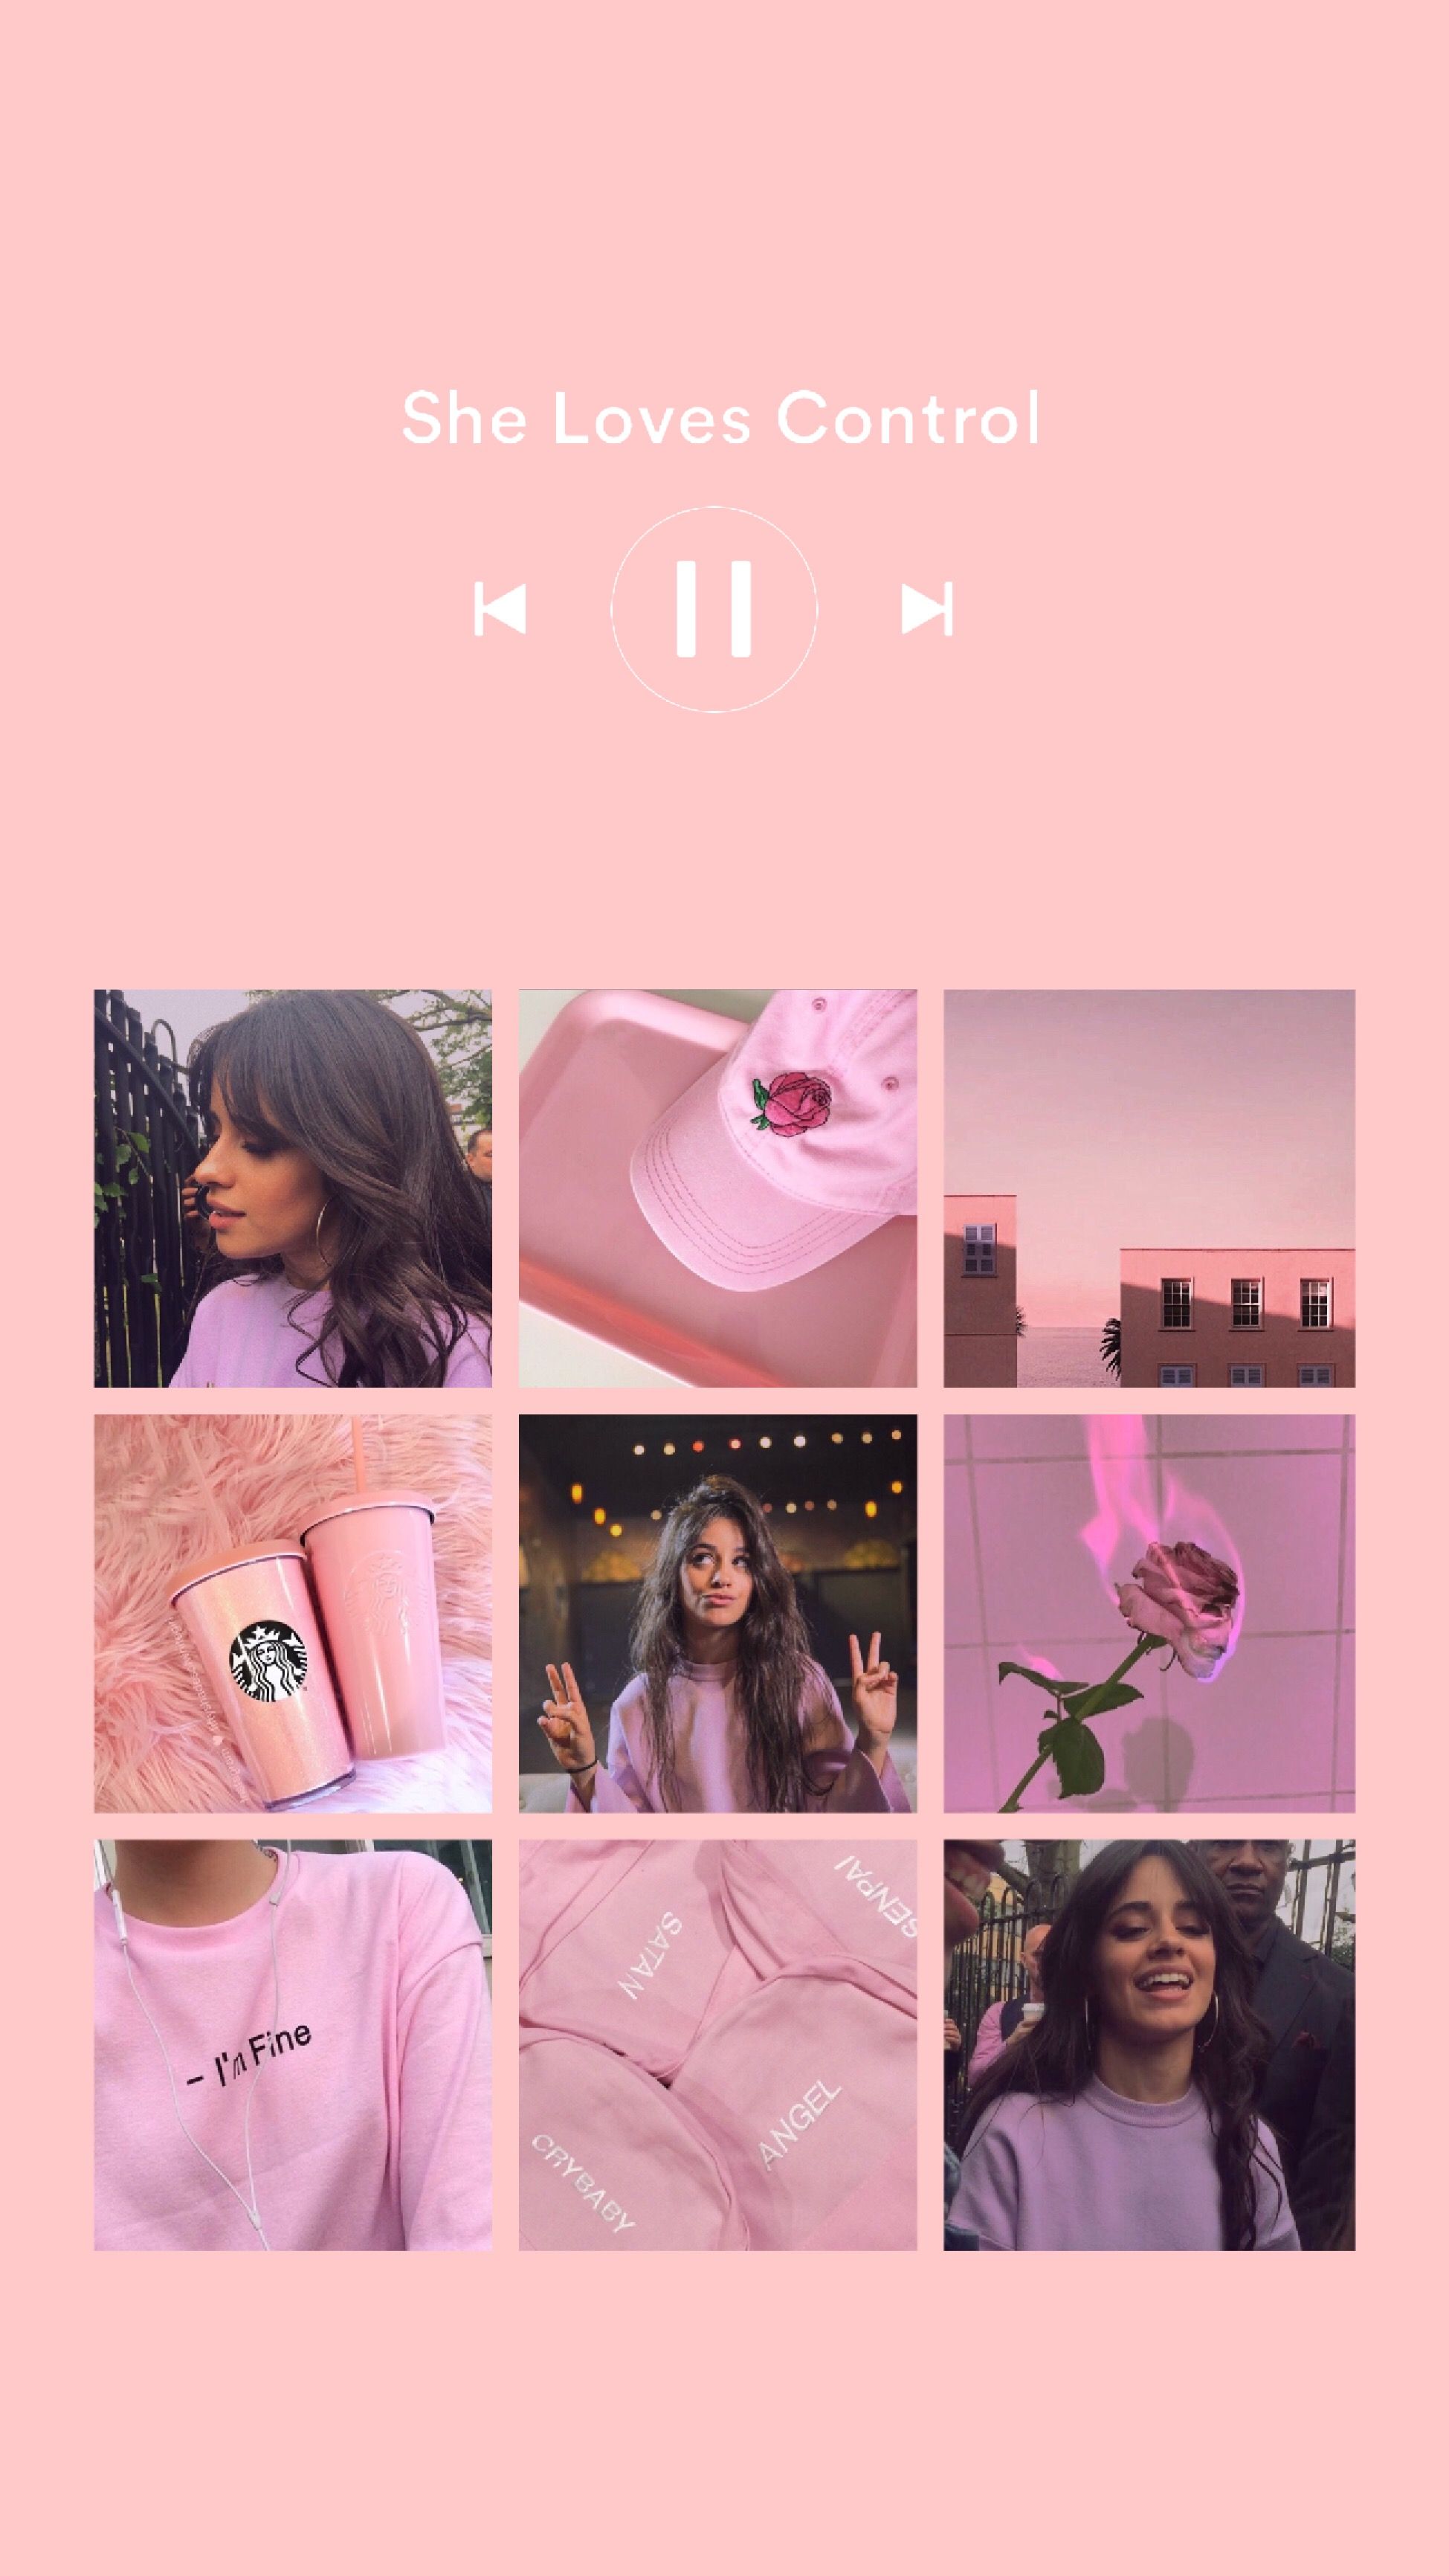 The pink screen with a woman's face and some pictures - Shawn Mendes